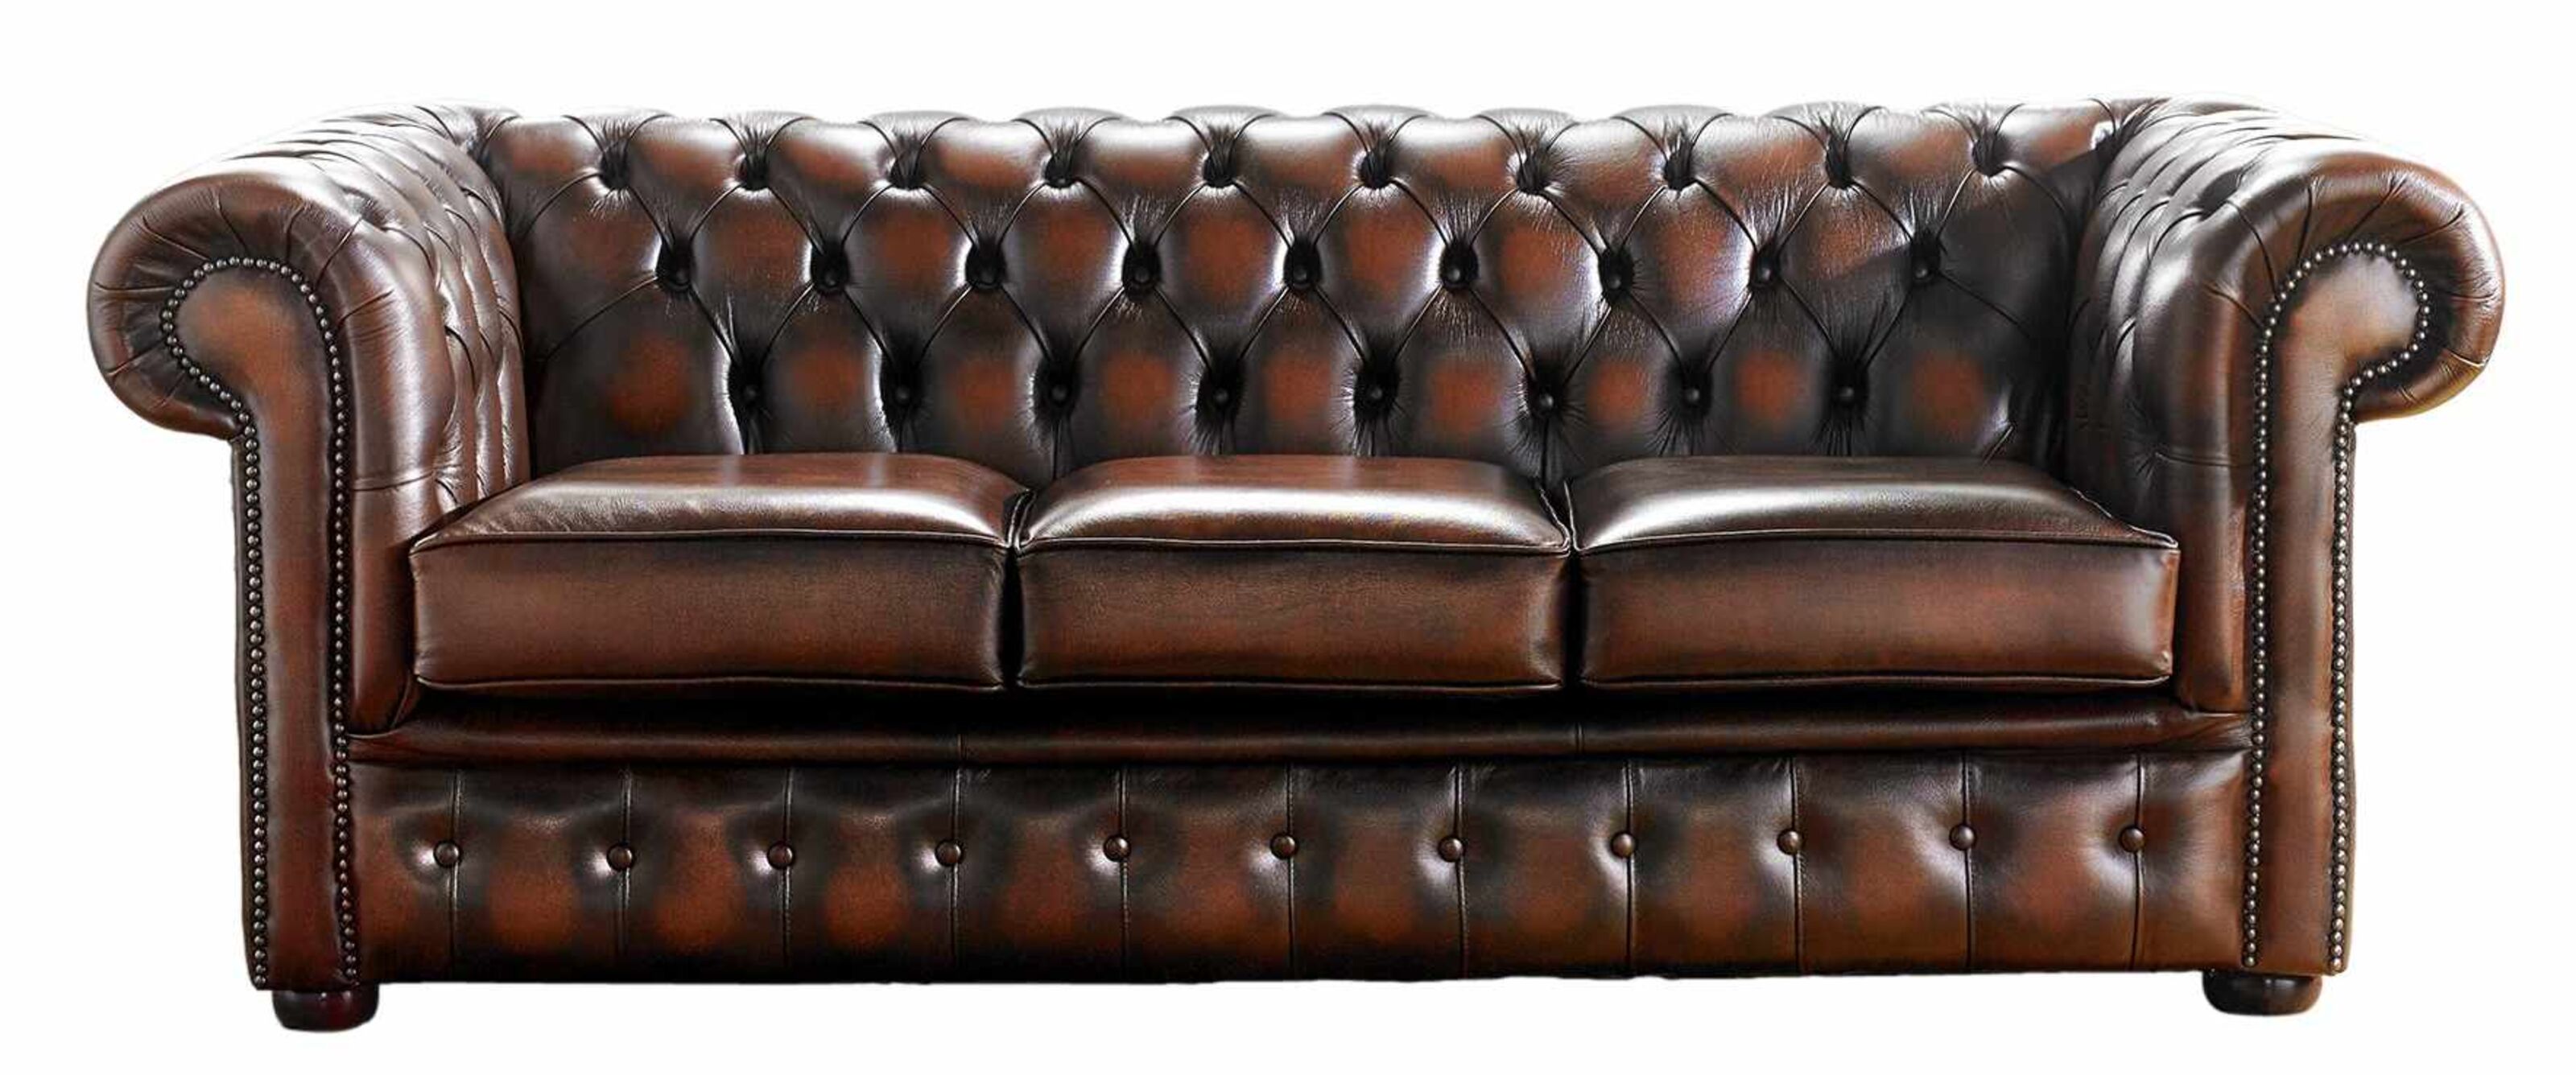 Alfresco Elegance Choosing a Chesterfield Sofa for Outdoor Living Spaces  %Post Title